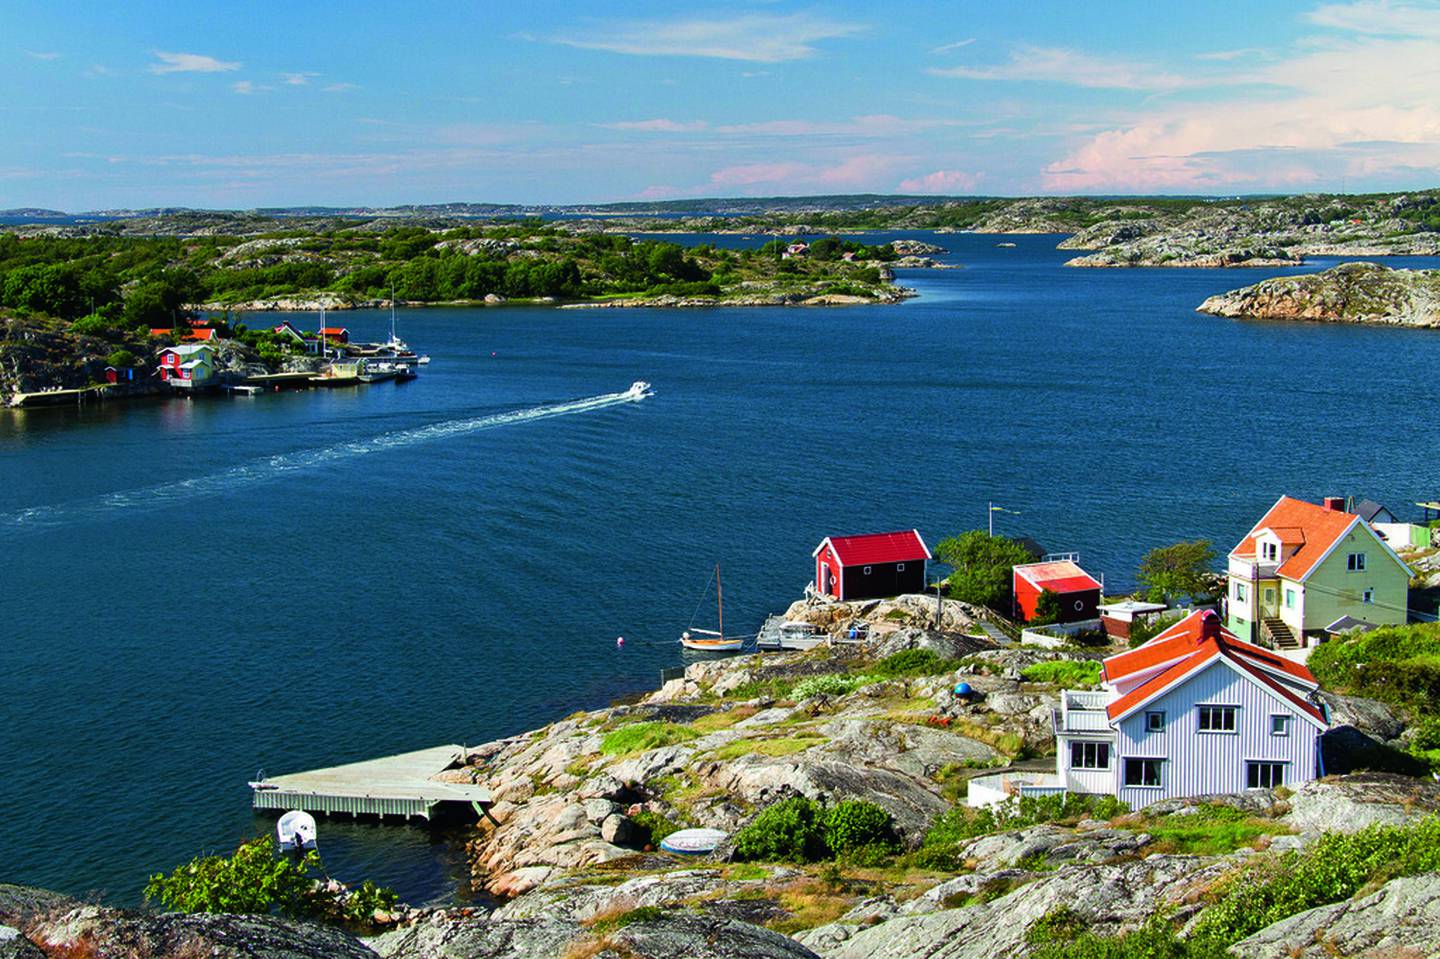 The island of Styrso in the Gothenburg Archipelago is a car-free speckle on Sweden’s west coast. Getty Images